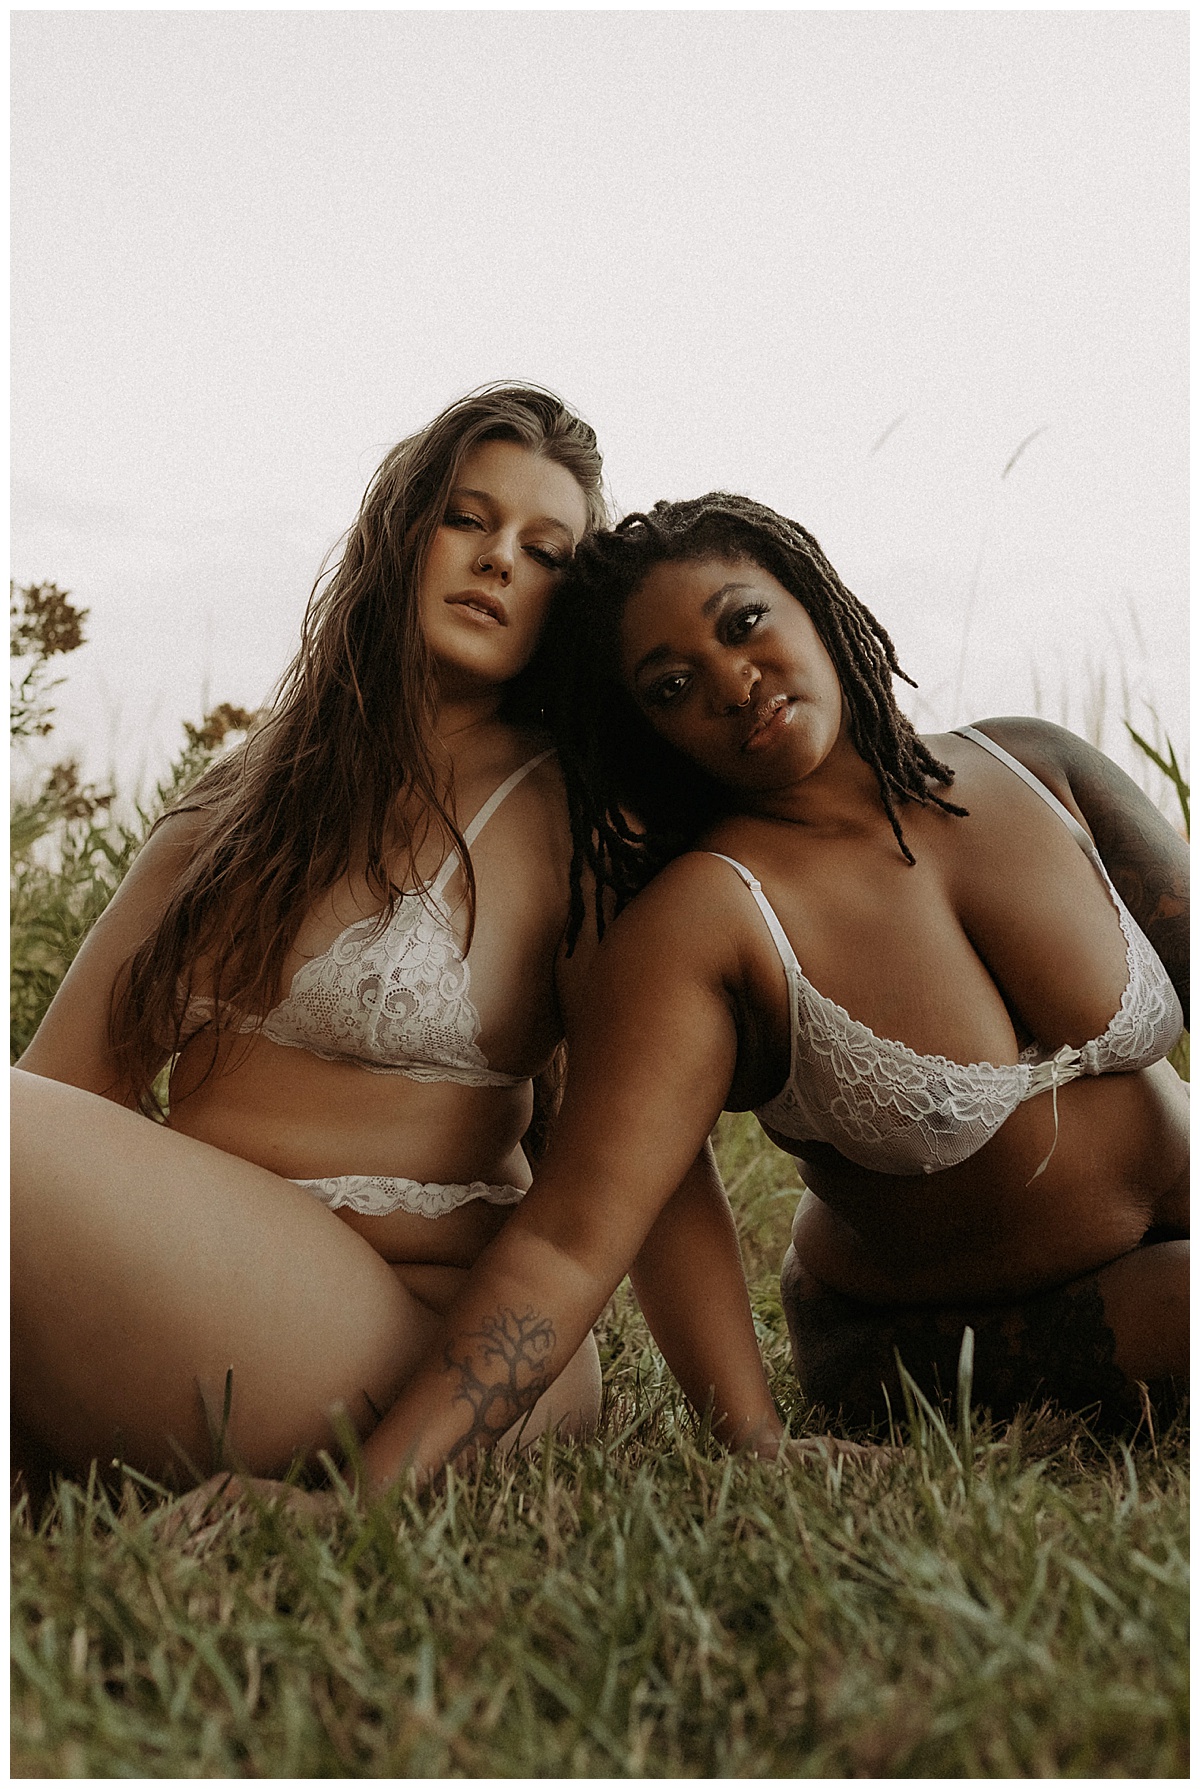 Woman sit together in white lingerie for Mary Castillo Photography